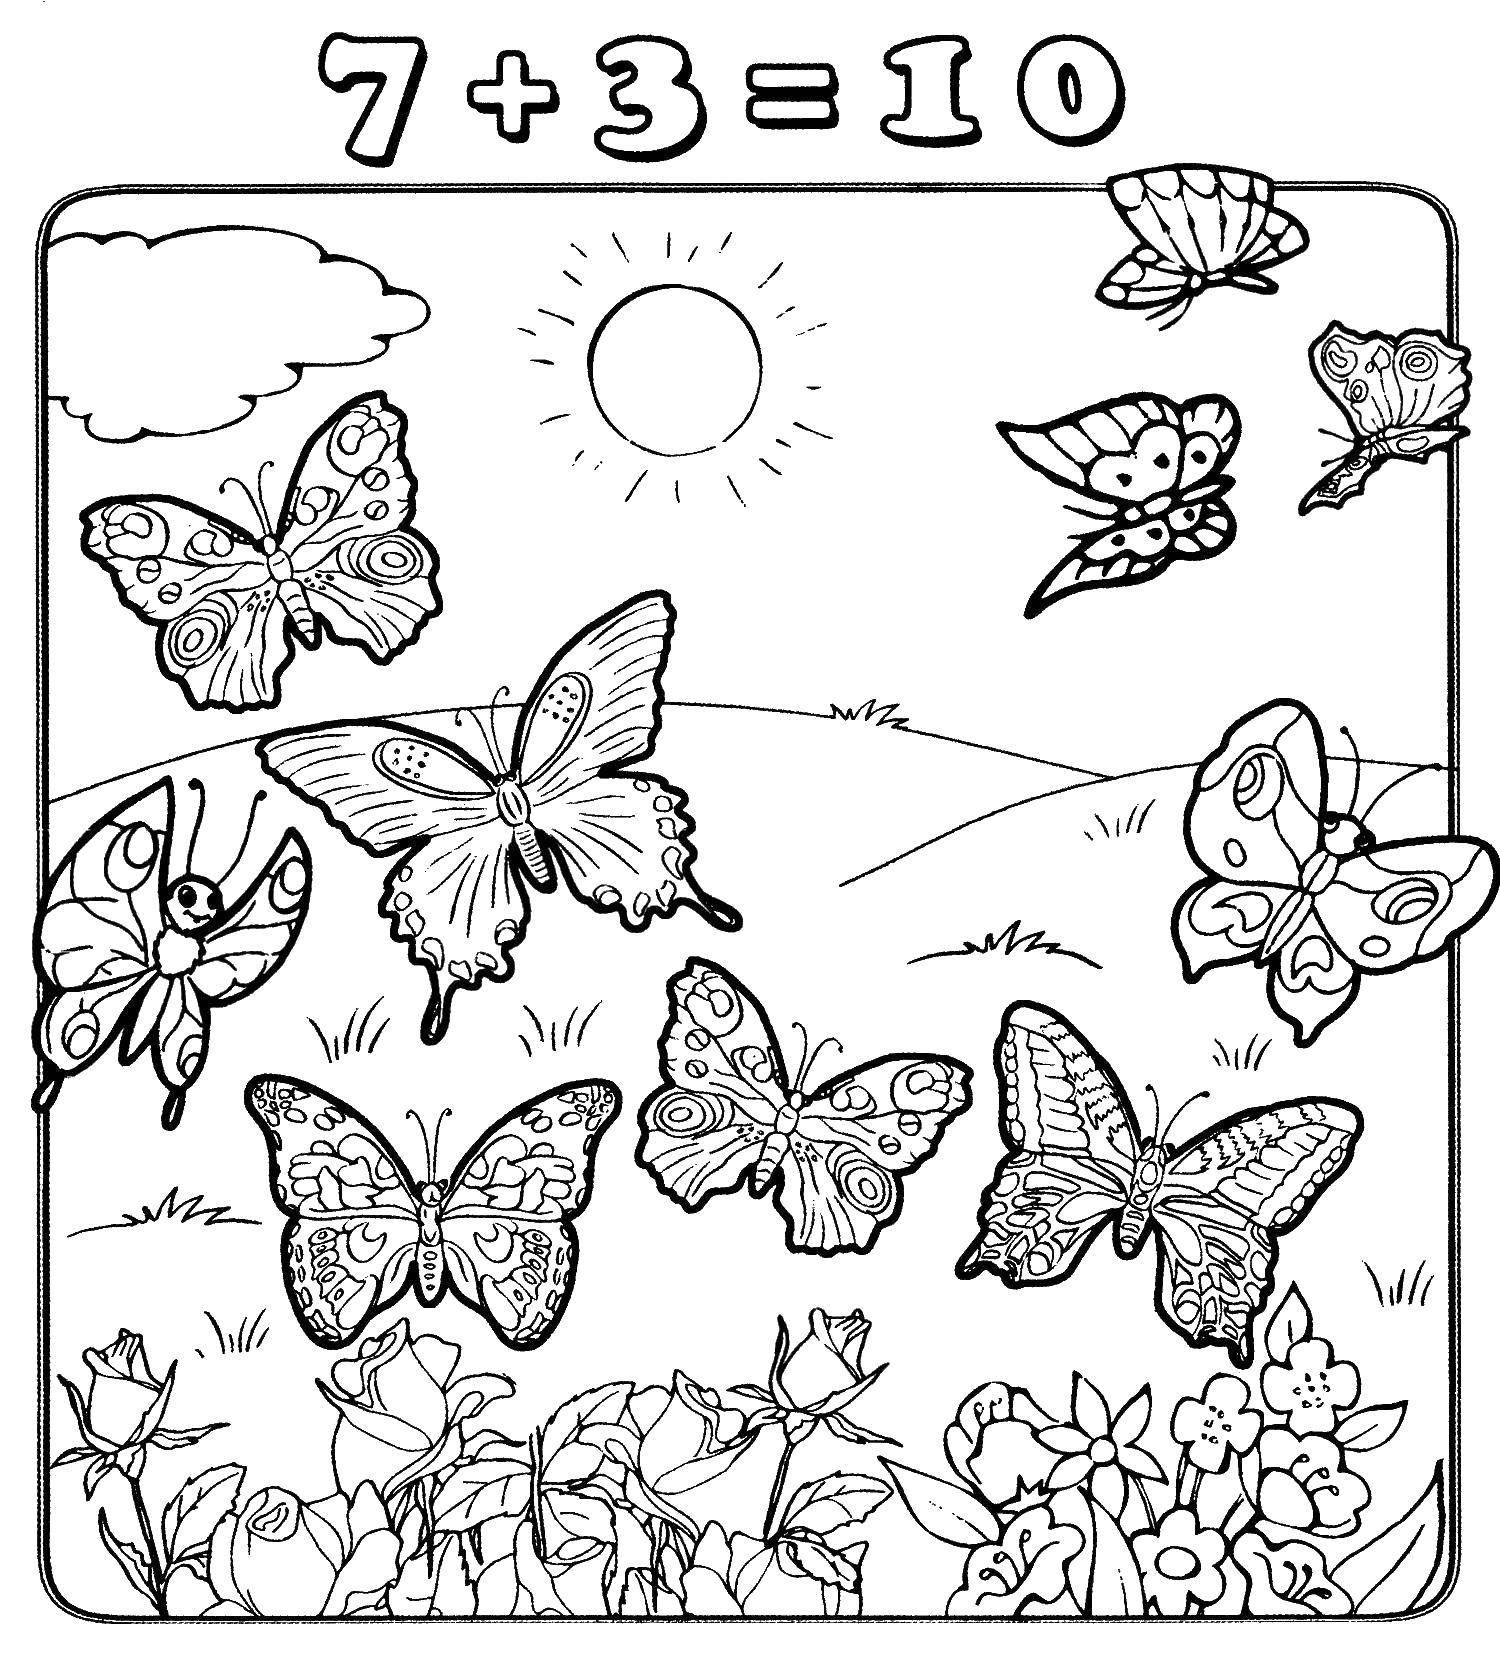 Coloring 10 butterflies. Category butterflies. Tags:  butterflies, insects, 10.